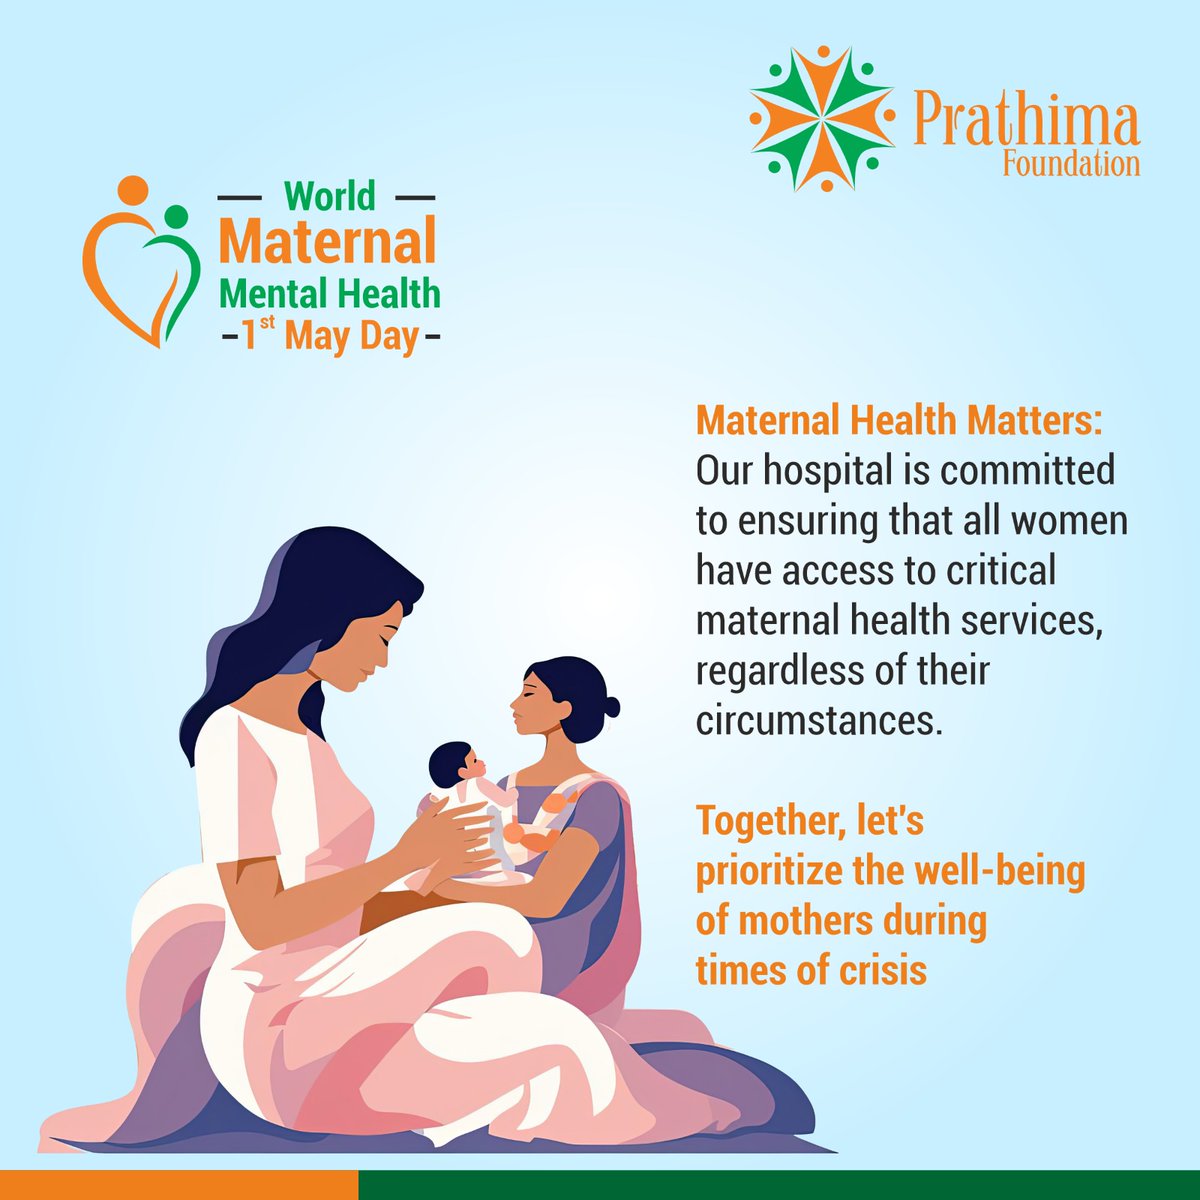 𝐖𝐨𝐫𝐥𝐝 𝐌𝐚𝐭𝐞𝐫𝐧𝐚𝐥 𝐌𝐞𝐧𝐭𝐚𝐥 𝐇𝐞𝐚𝐥𝐭𝐡 𝐃𝐚𝐲!
Together, let's prioritize the well-being of mothers during times of crisis

#MaternalMentalHealth #WorldMaternalMentalHealth #PerinatalMentalHealth #MotherhoodMatters #MaternalWellbeing #prathimafoundation #PF